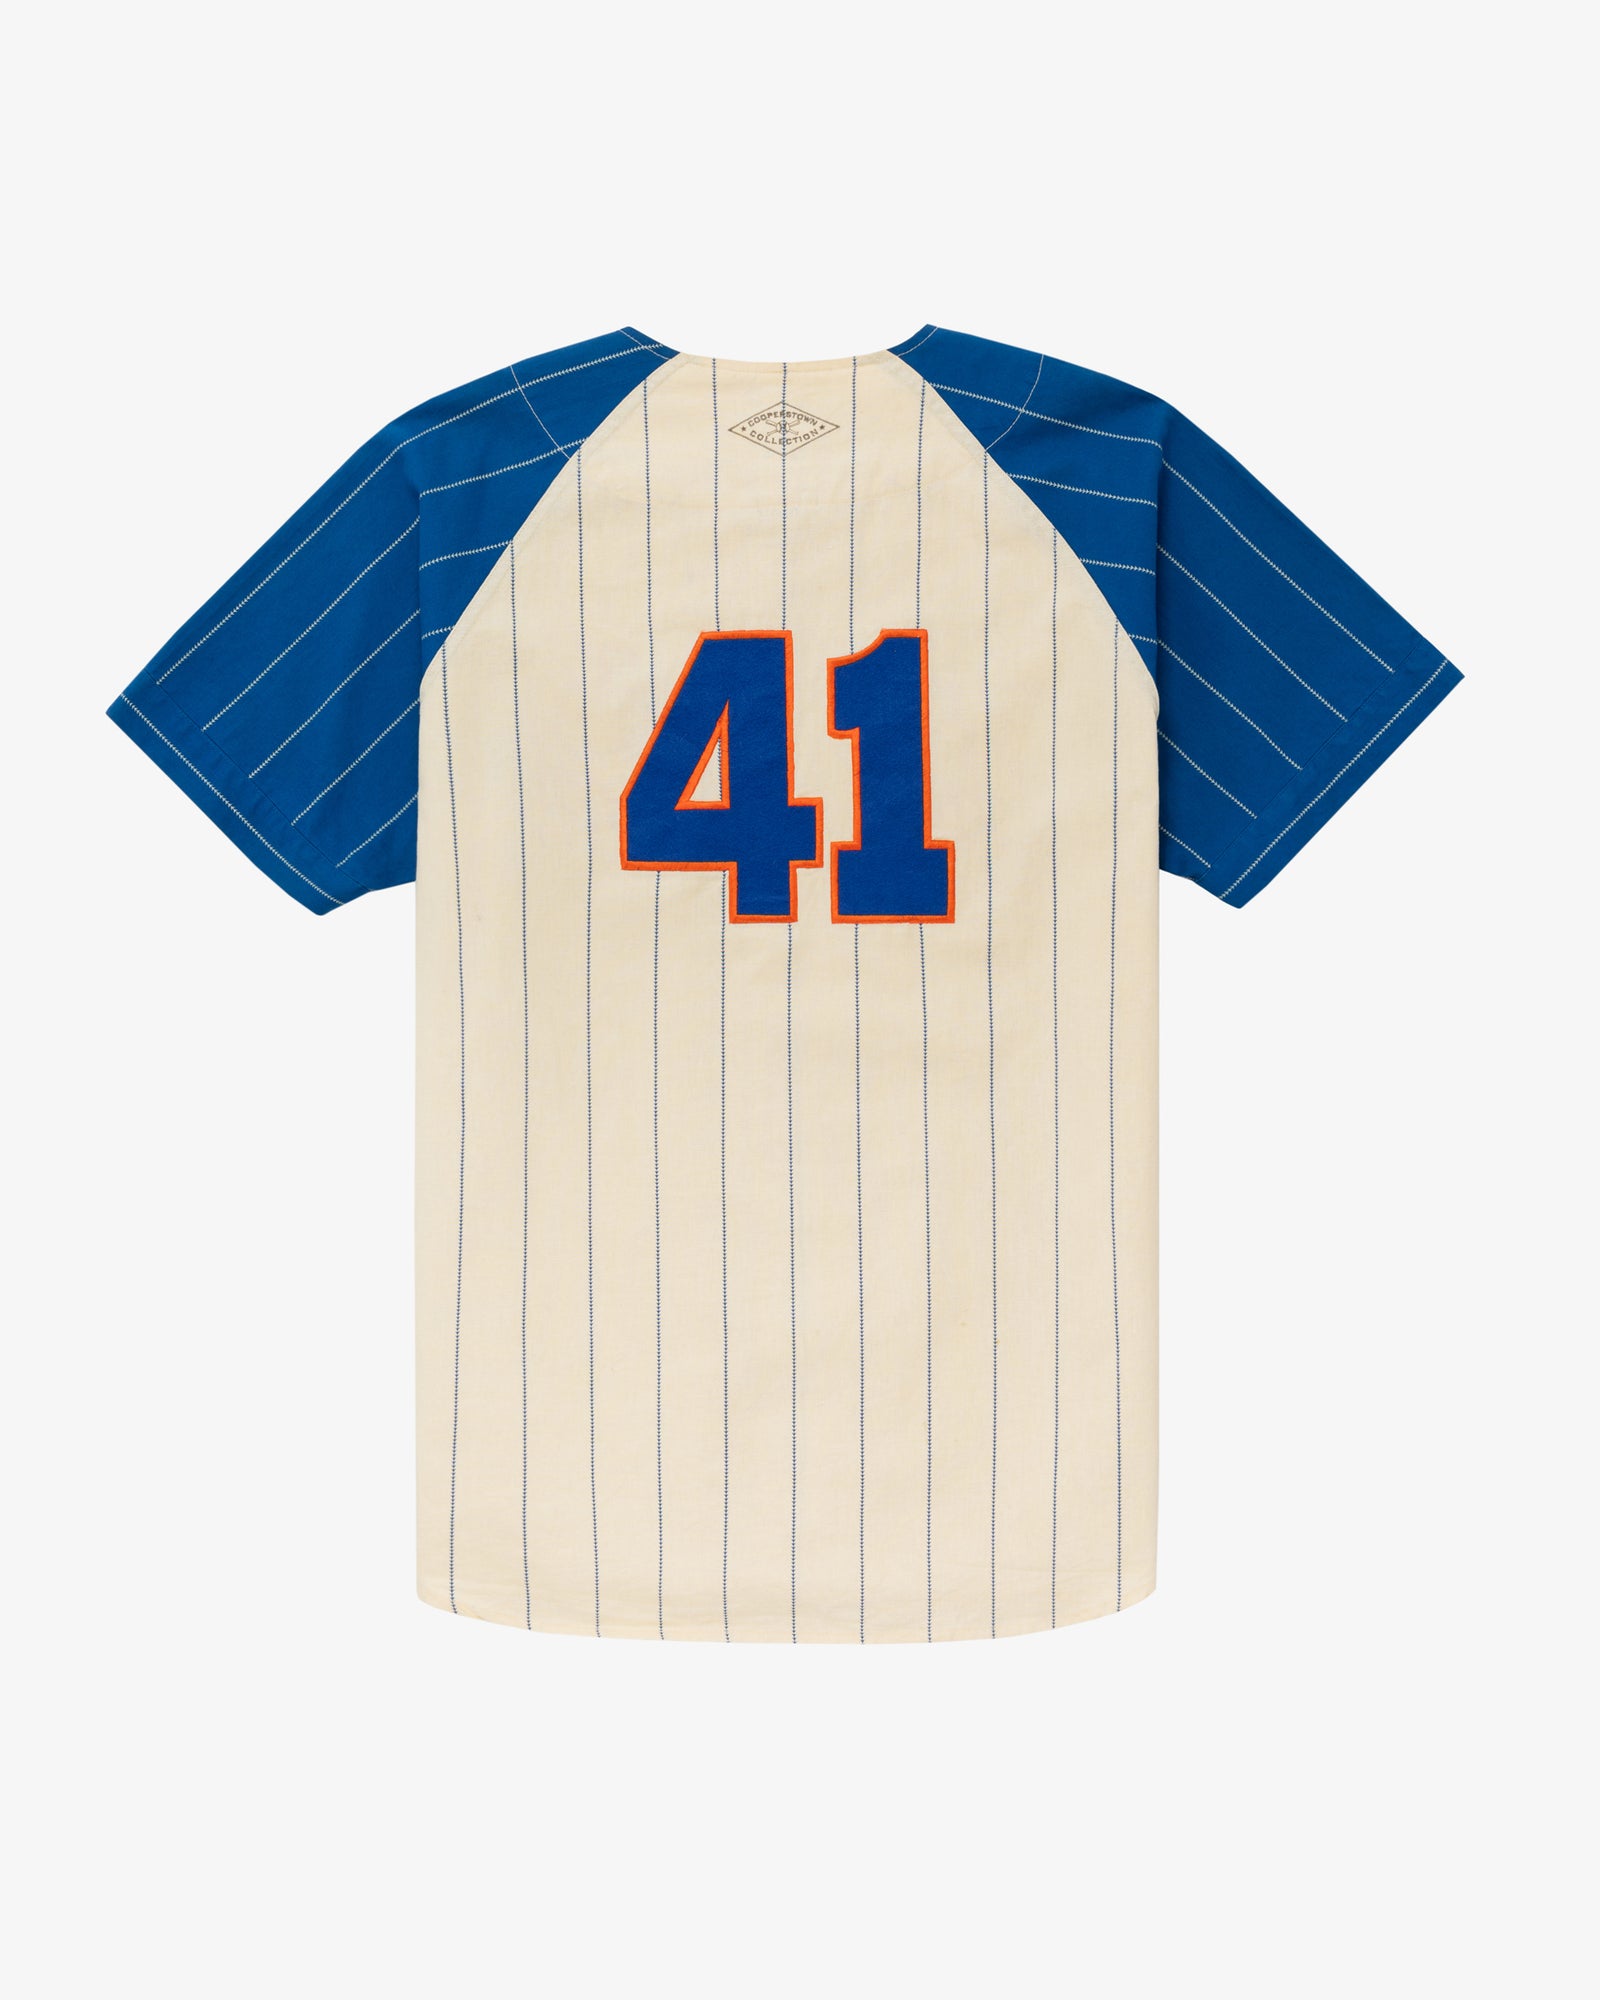 Vintage Mets Coopertown Collection Jersey